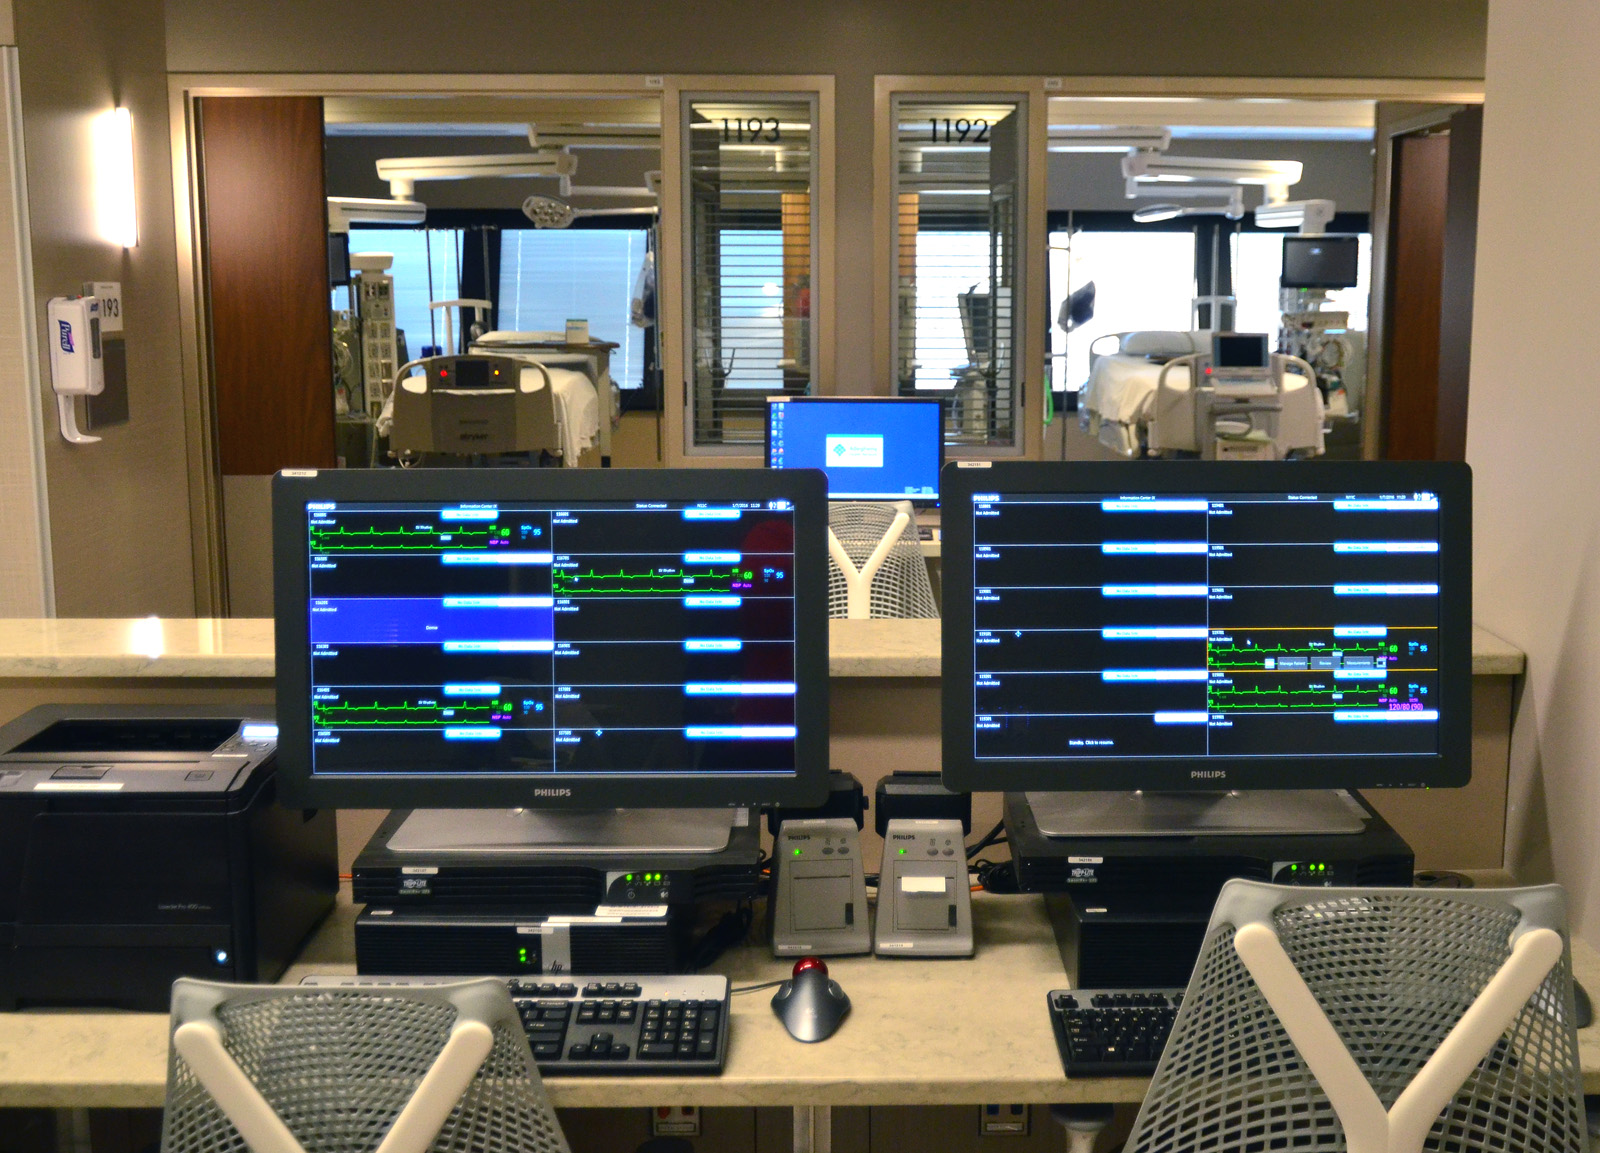 The view from a monitoring station in Allegheny General Hospital’s new Cardiac Intensive Care/Cardiac Telemetry Unit